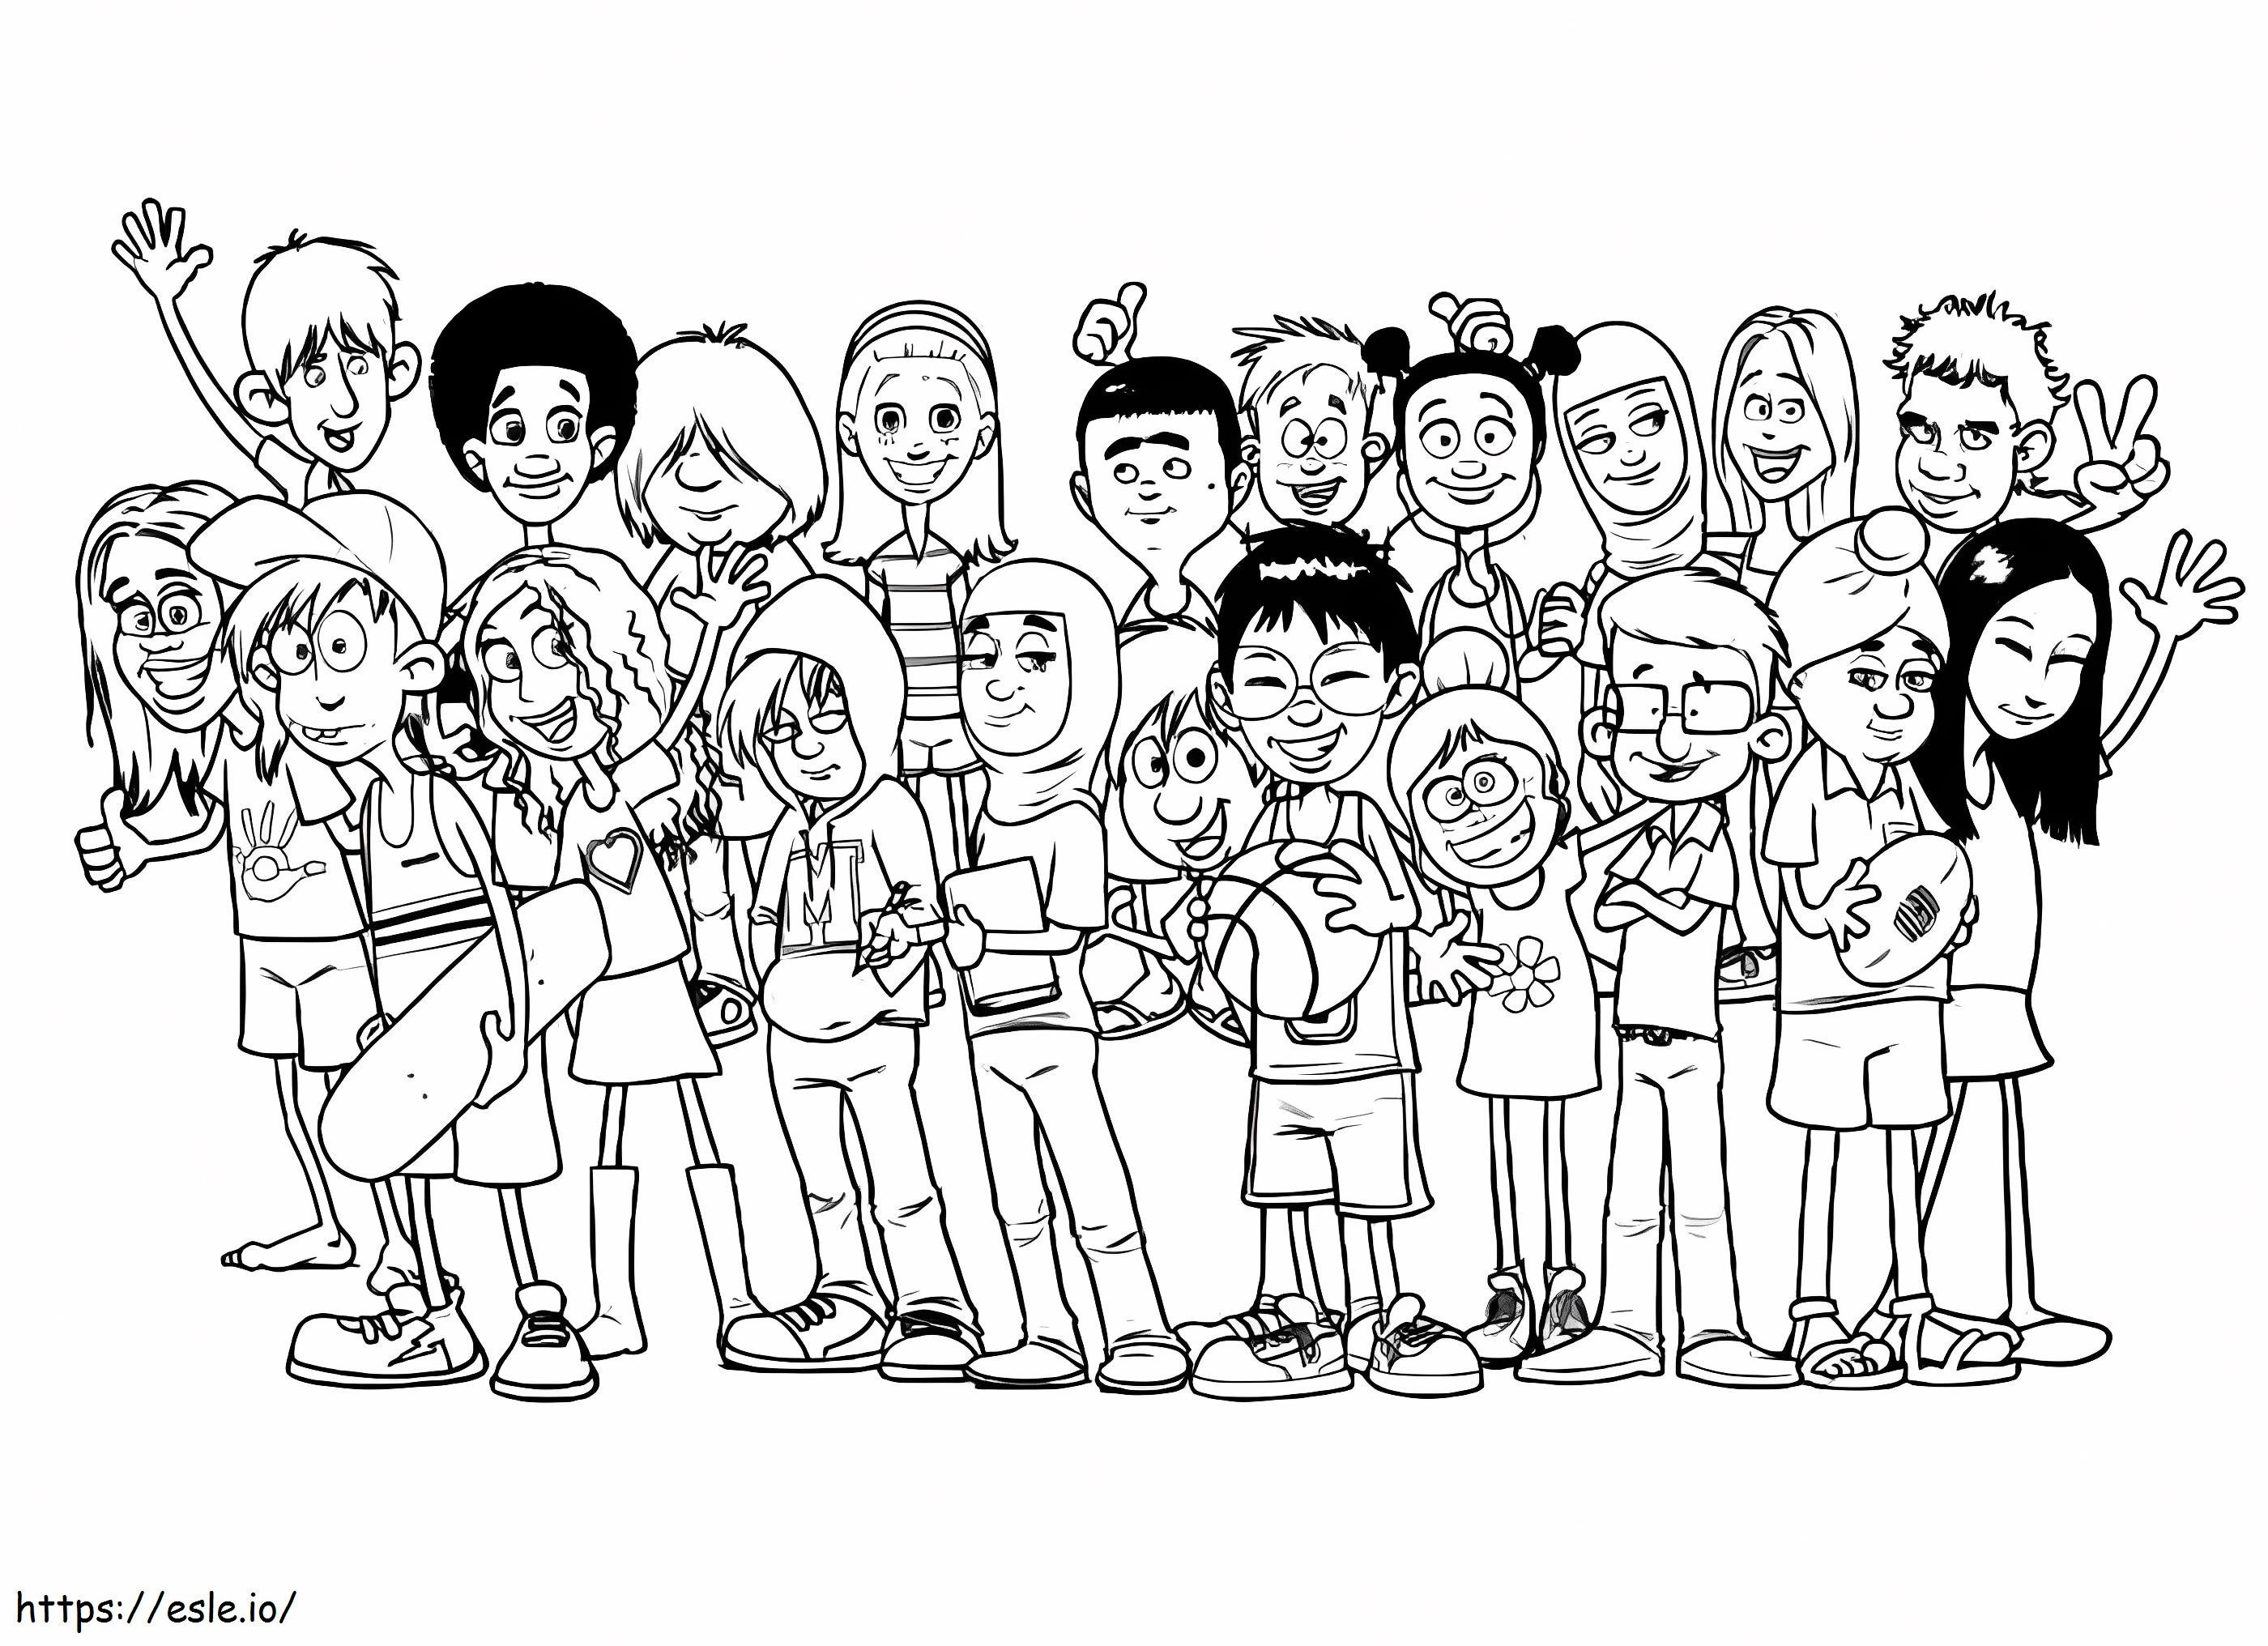 Students Diversity coloring page